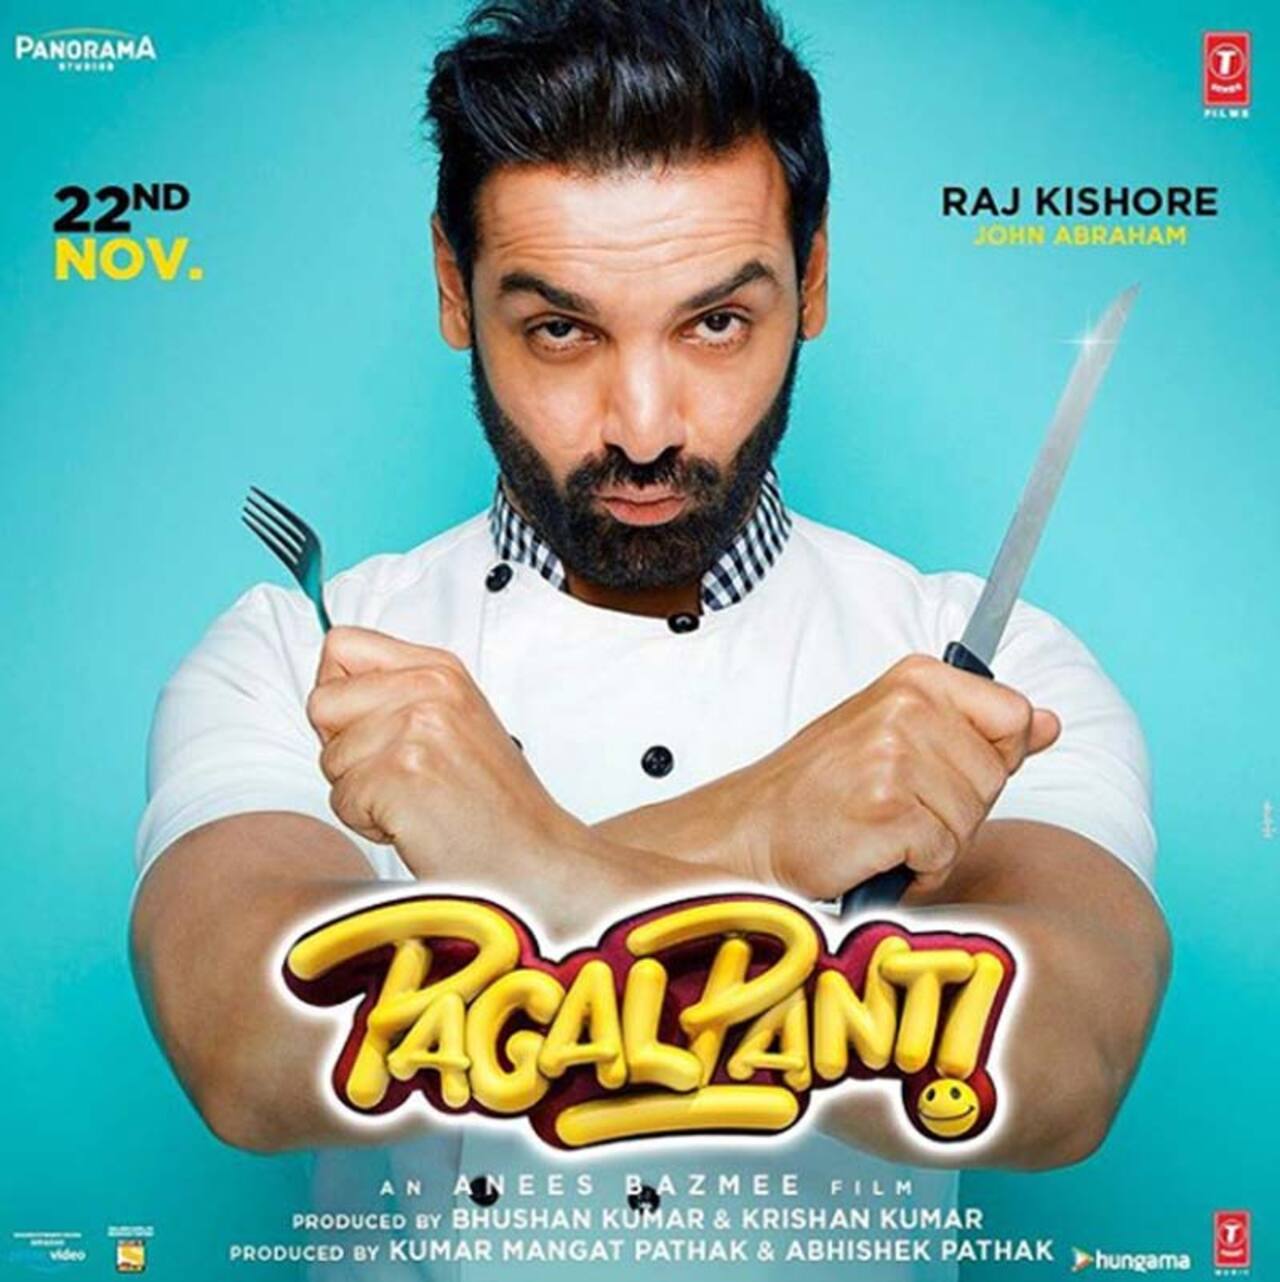 Filmy Friday: Pagalpanti has the potential to become a HIT as John Abraham enjoys a high success ratio in comedy films